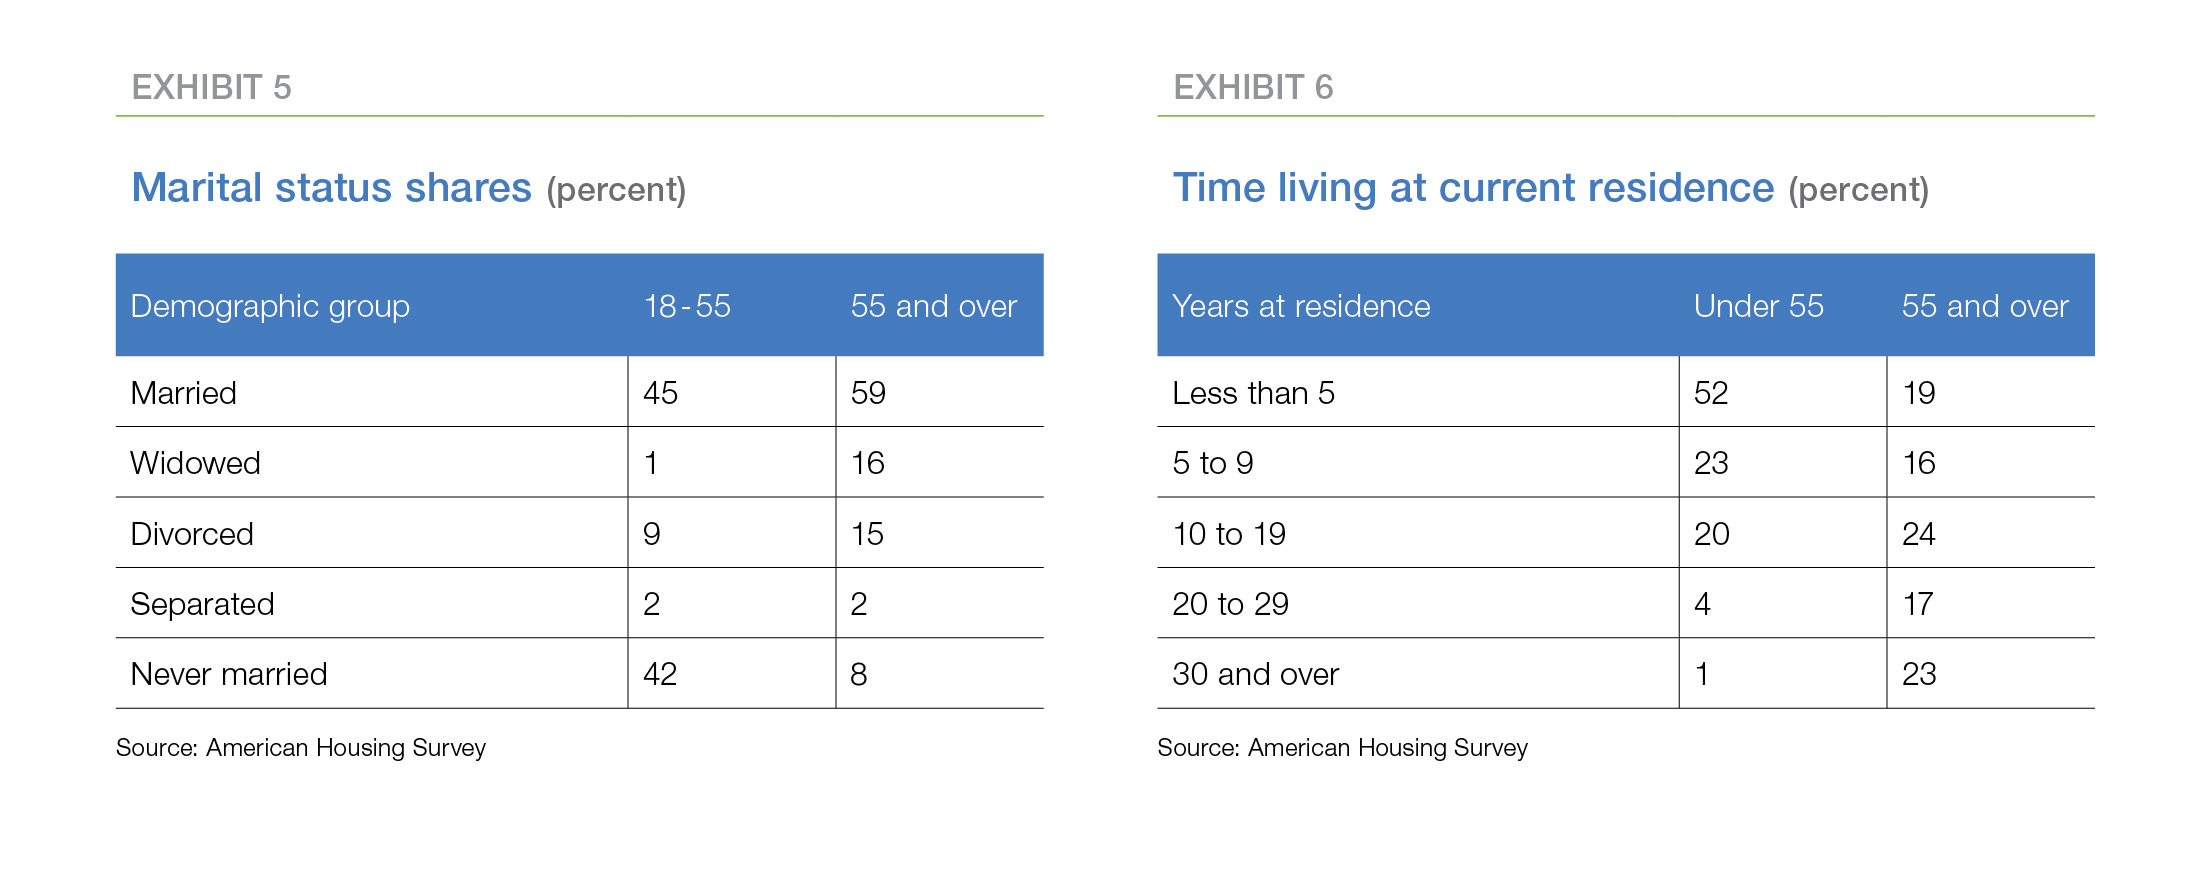 Exhibit 5 and 6: Marital status shares and Time living at residence